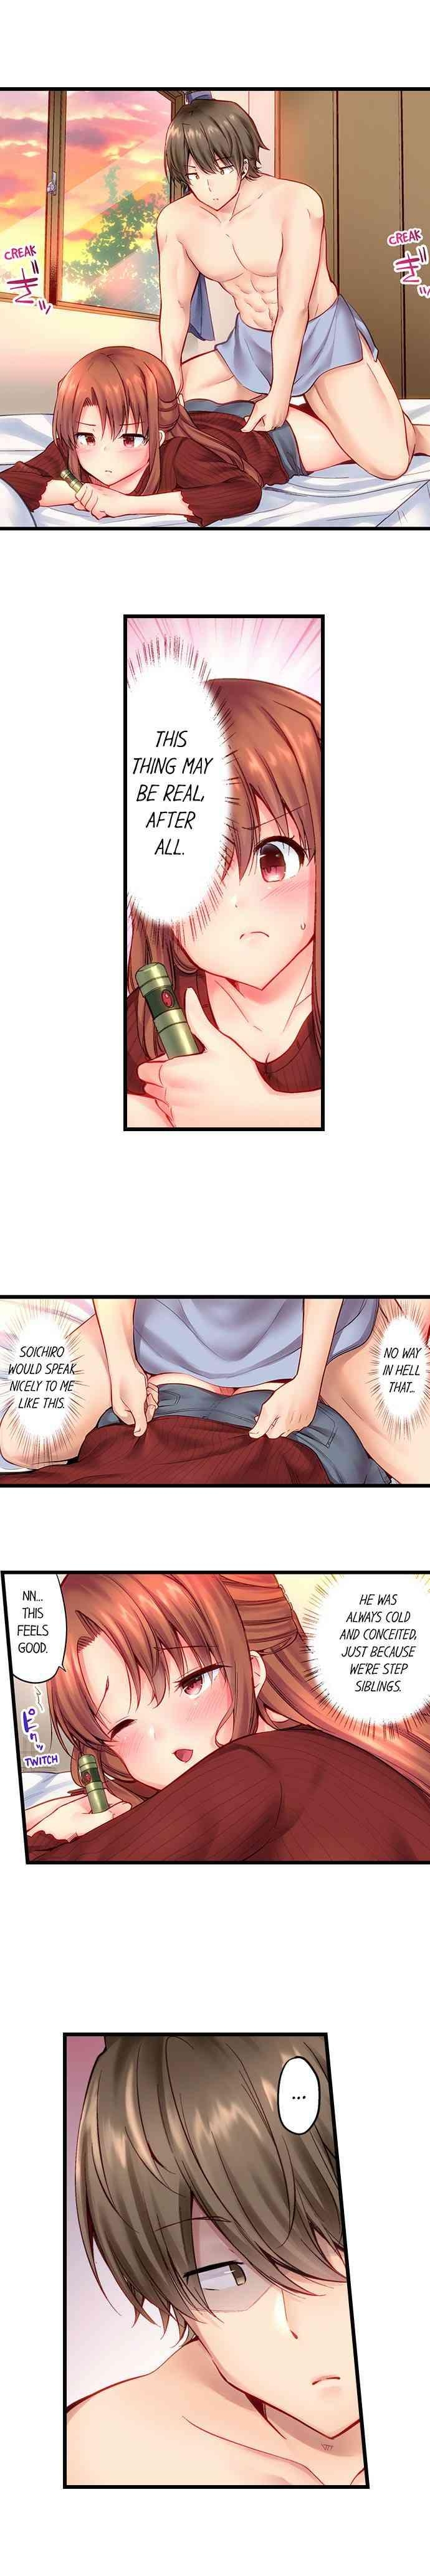 [Yuuki HB] "Hypnotized" Sex with My Brother Ch.21/? [English] [Ongoing] 9